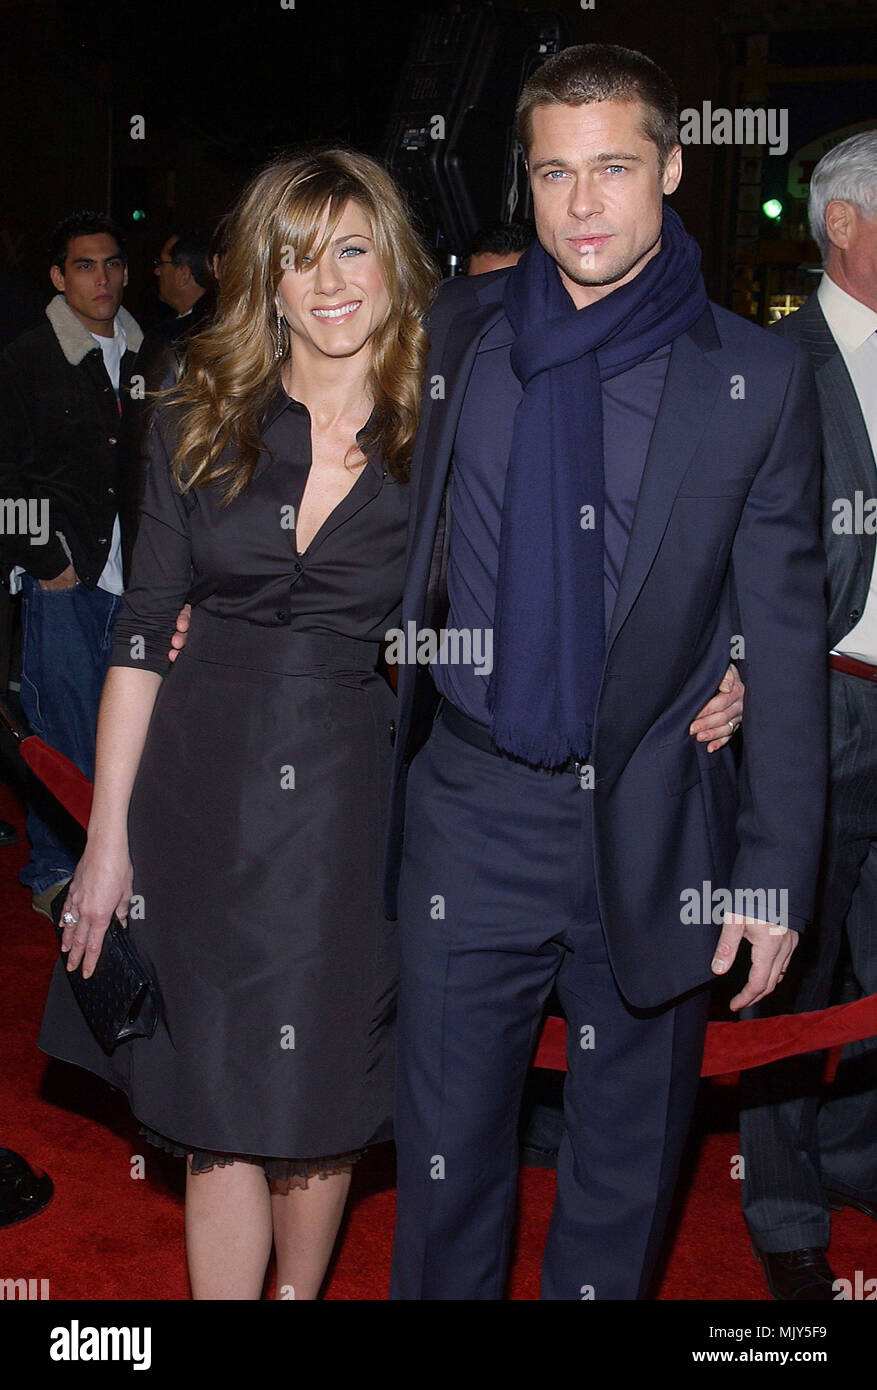 Jennifer Aniston and Brad Pitt arriving at the premiere of ' Along Came Polly ' at the Chinese Theatre in Los Angeles. january 12, 2004.          -            AnistonJenn PittBrad024A.jpg           -              AnistonJenn PittBrad024A.jpgAnistonJenn PittBrad024A  Event in Hollywood Life - California,  Red Carpet Event, Vertical, USA, Film Industry, Celebrities,  Photography, Bestof, Arts Culture and Entertainment, Topix Celebrities fashion /  from the Red Carpet-, Vertical, Best of, Hollywood Life, Event in Hollywood Life - California,  Red Carpet , USA, Film Industry, Celebrities,  movie c Stock Photo